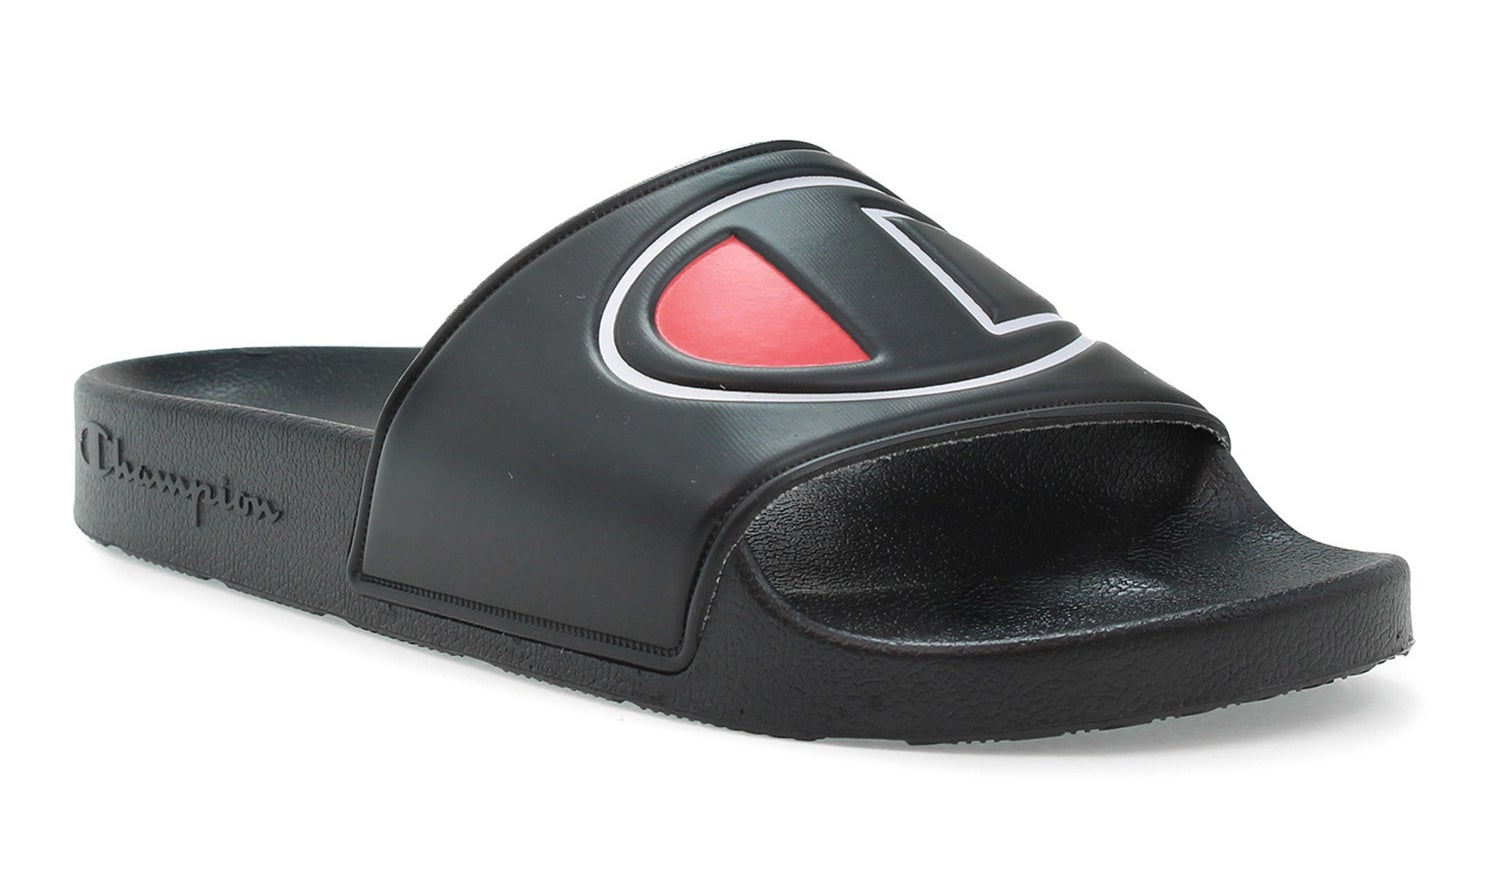 A black slide sandal emblazoned with the Champion logo